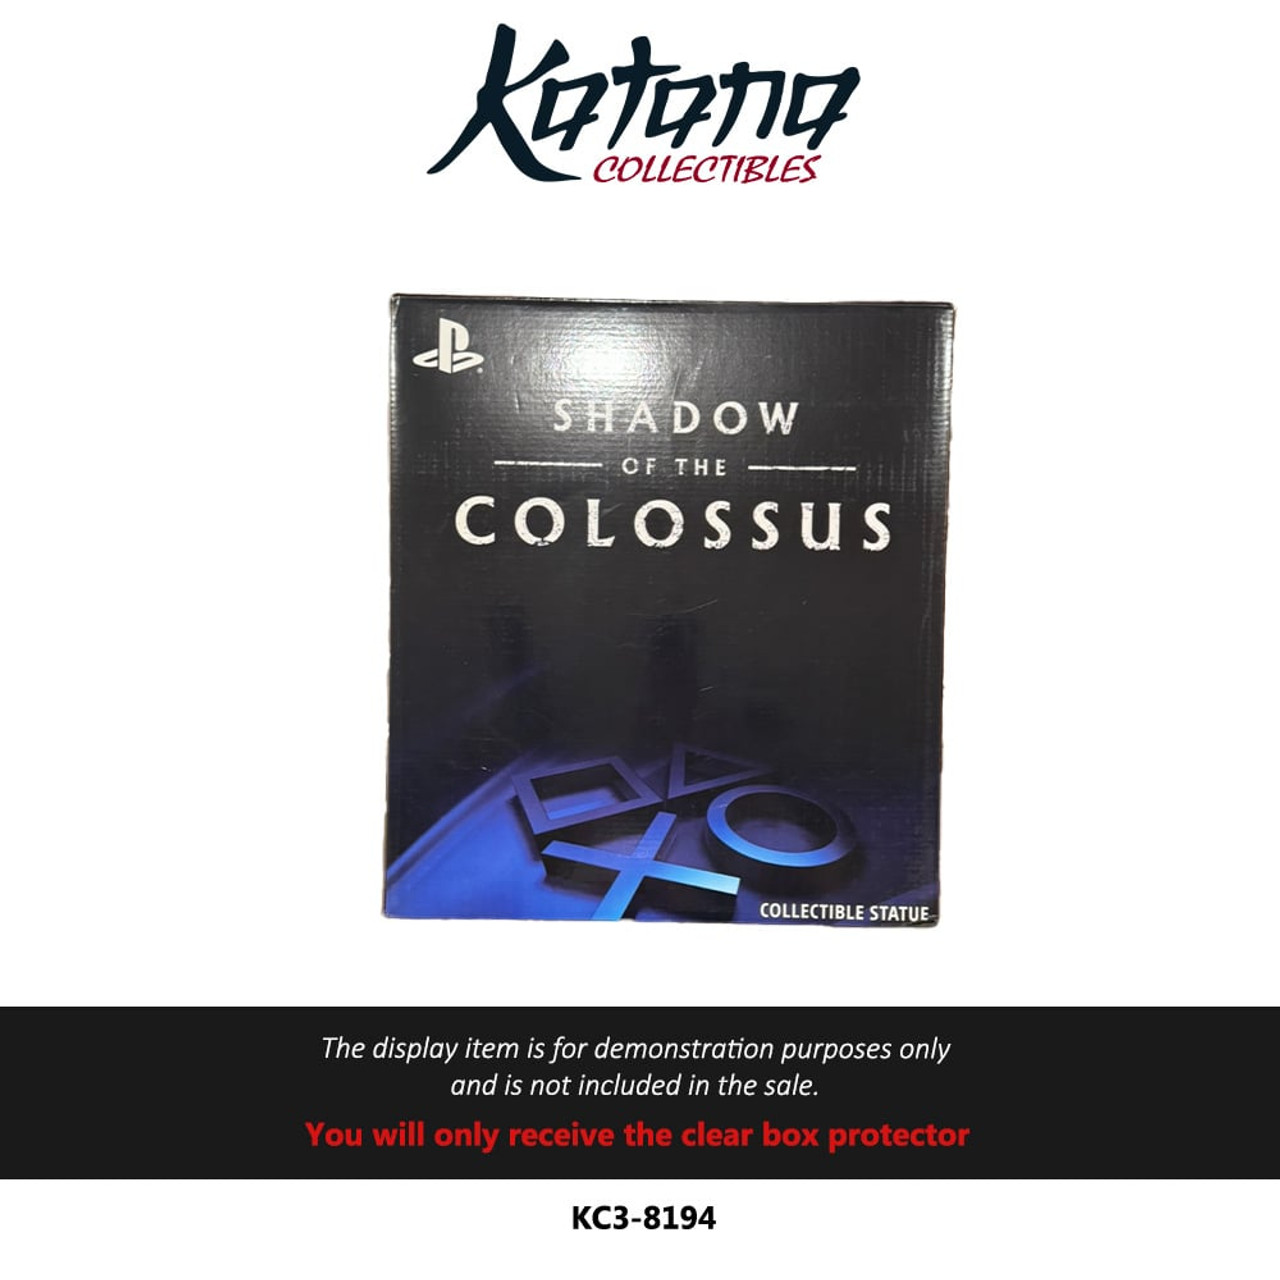 Katana Collectibles Protector For Shadow of the Colossus Gamestop statue box